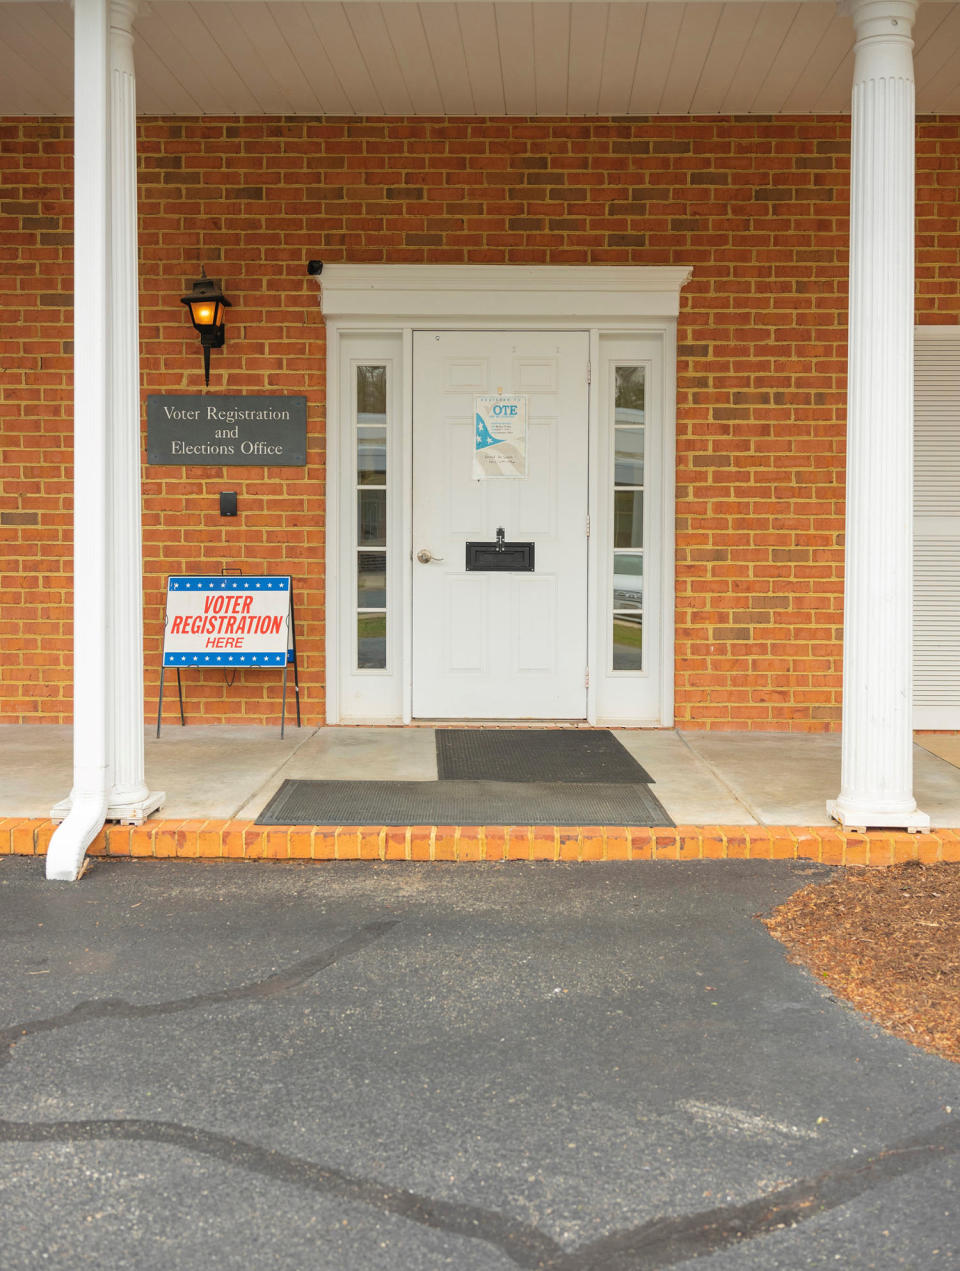 Buckingham County's Voter Registration and Elections Office. (Matt Eich for NBC News)